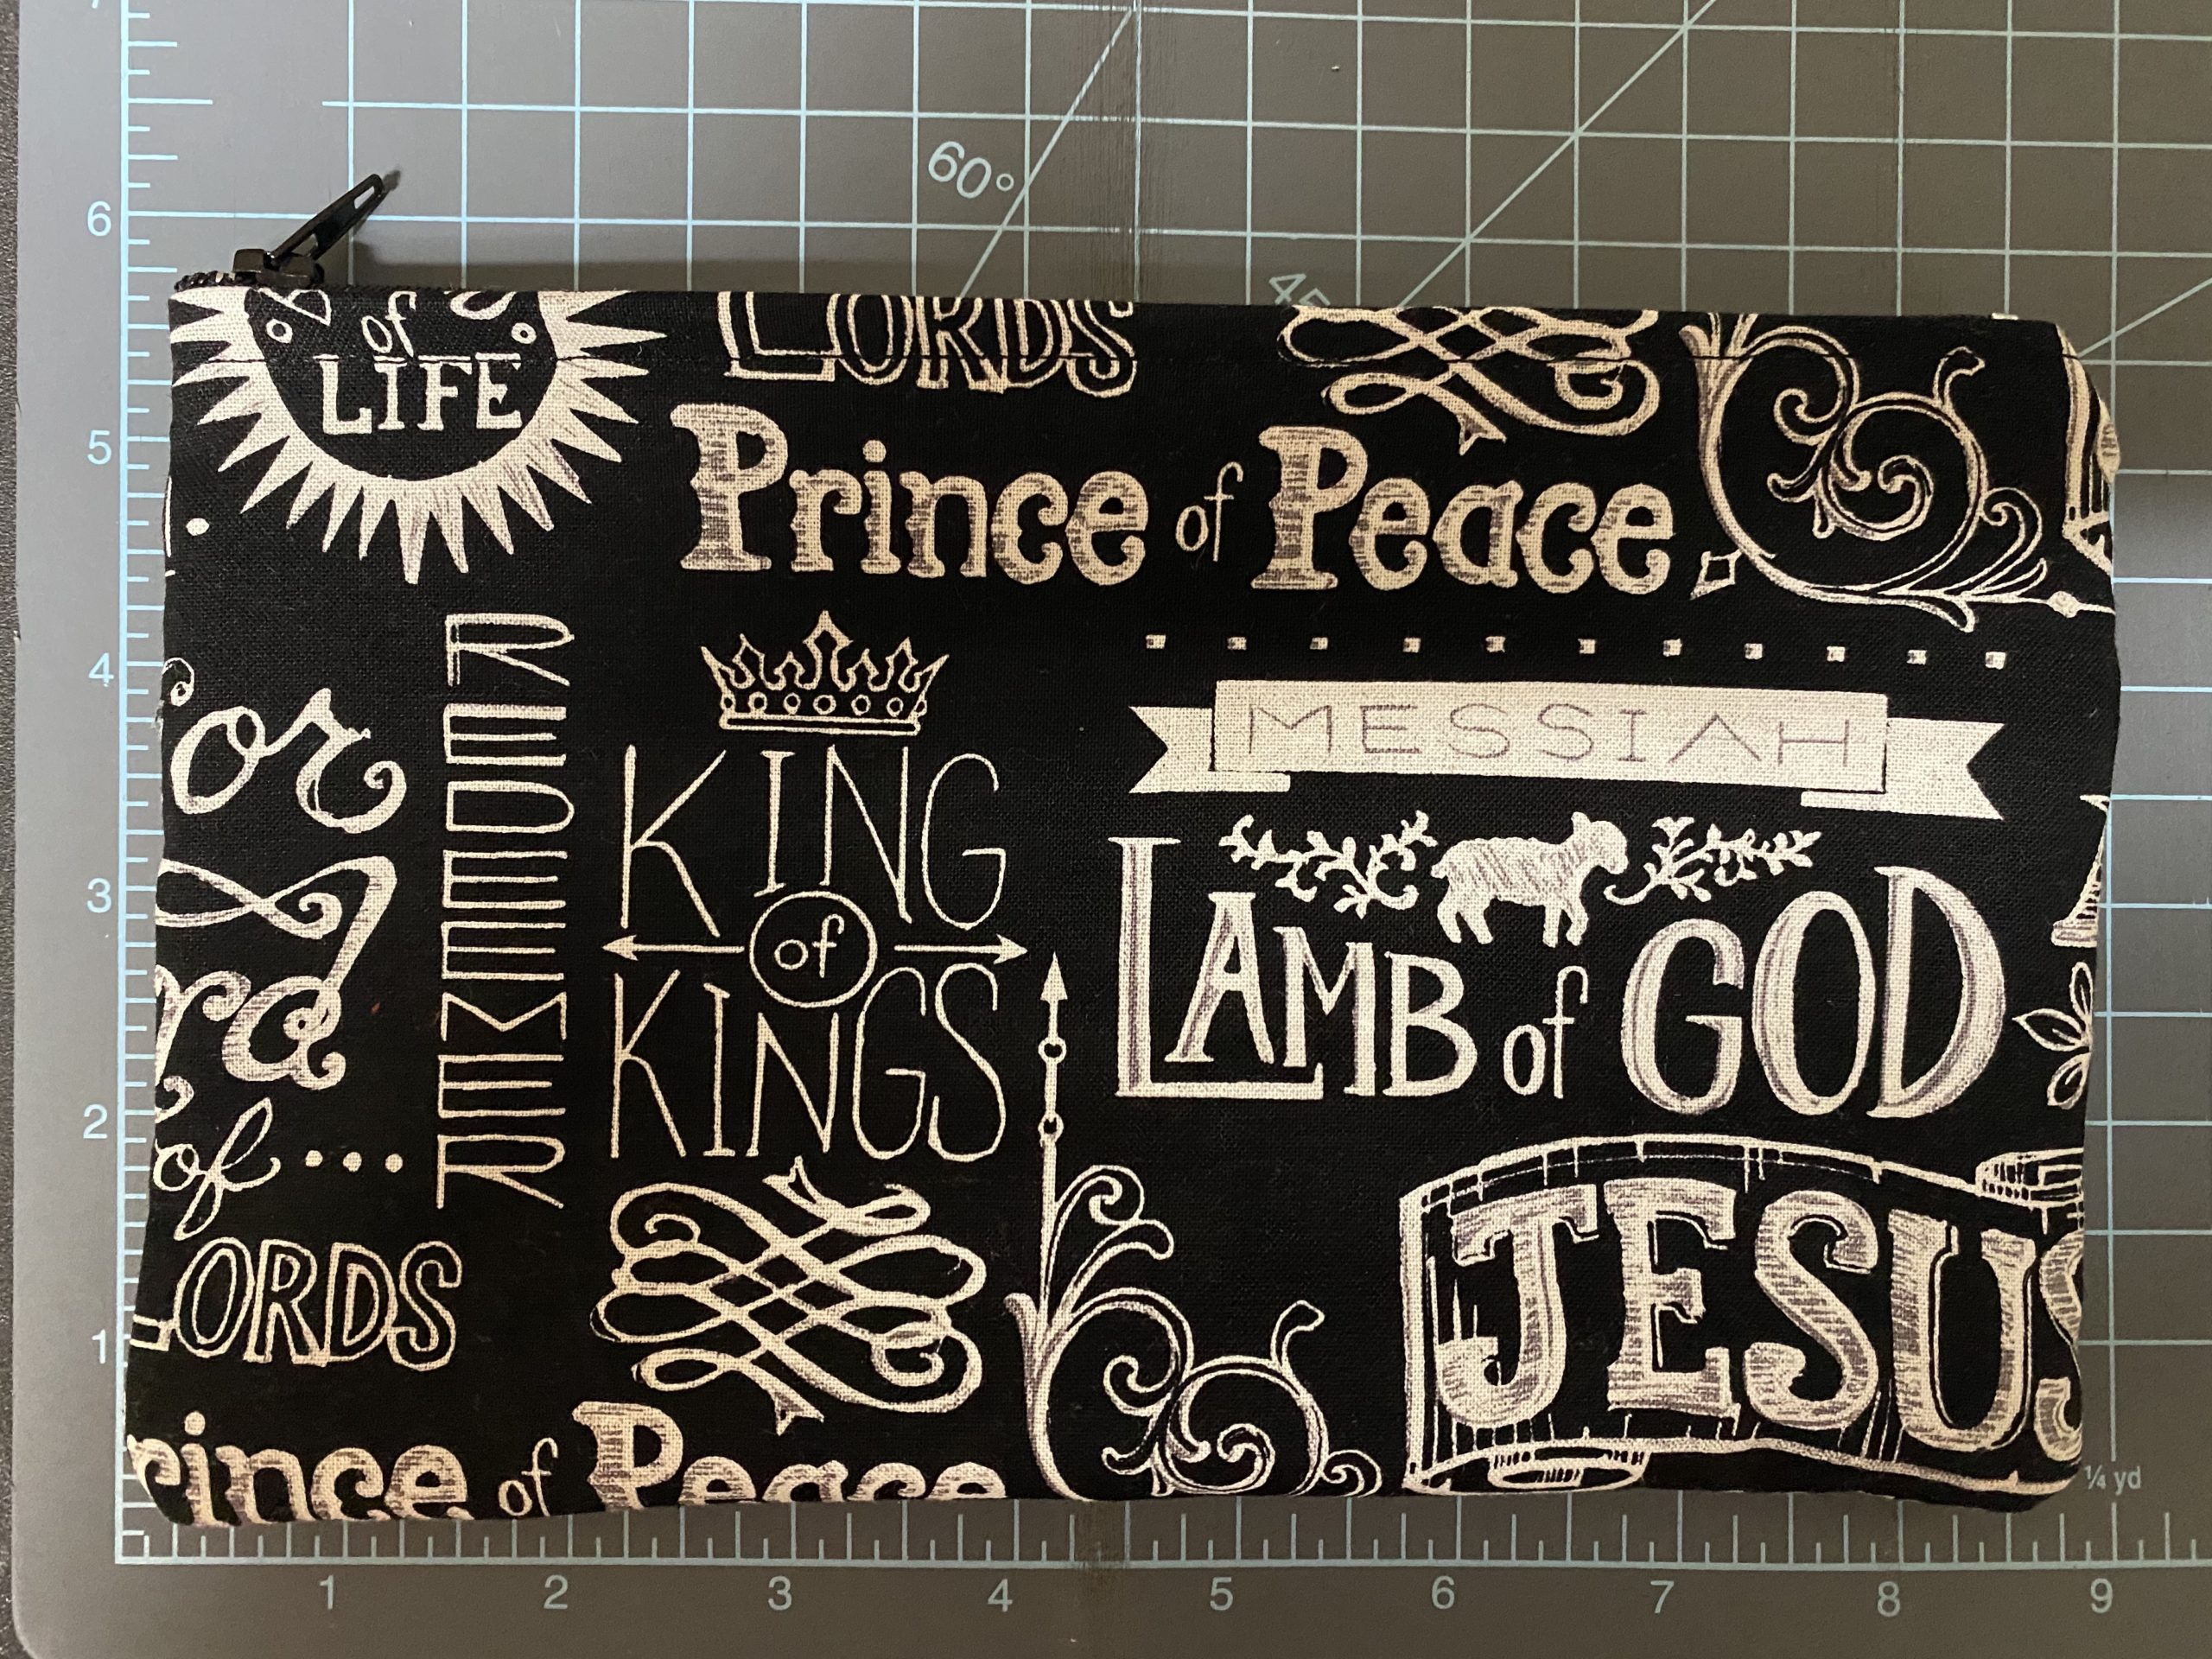 Names of Jesus Zipper Pouch - This is a zipper pouch that features the names of Jesus on it. #ZipperPouch